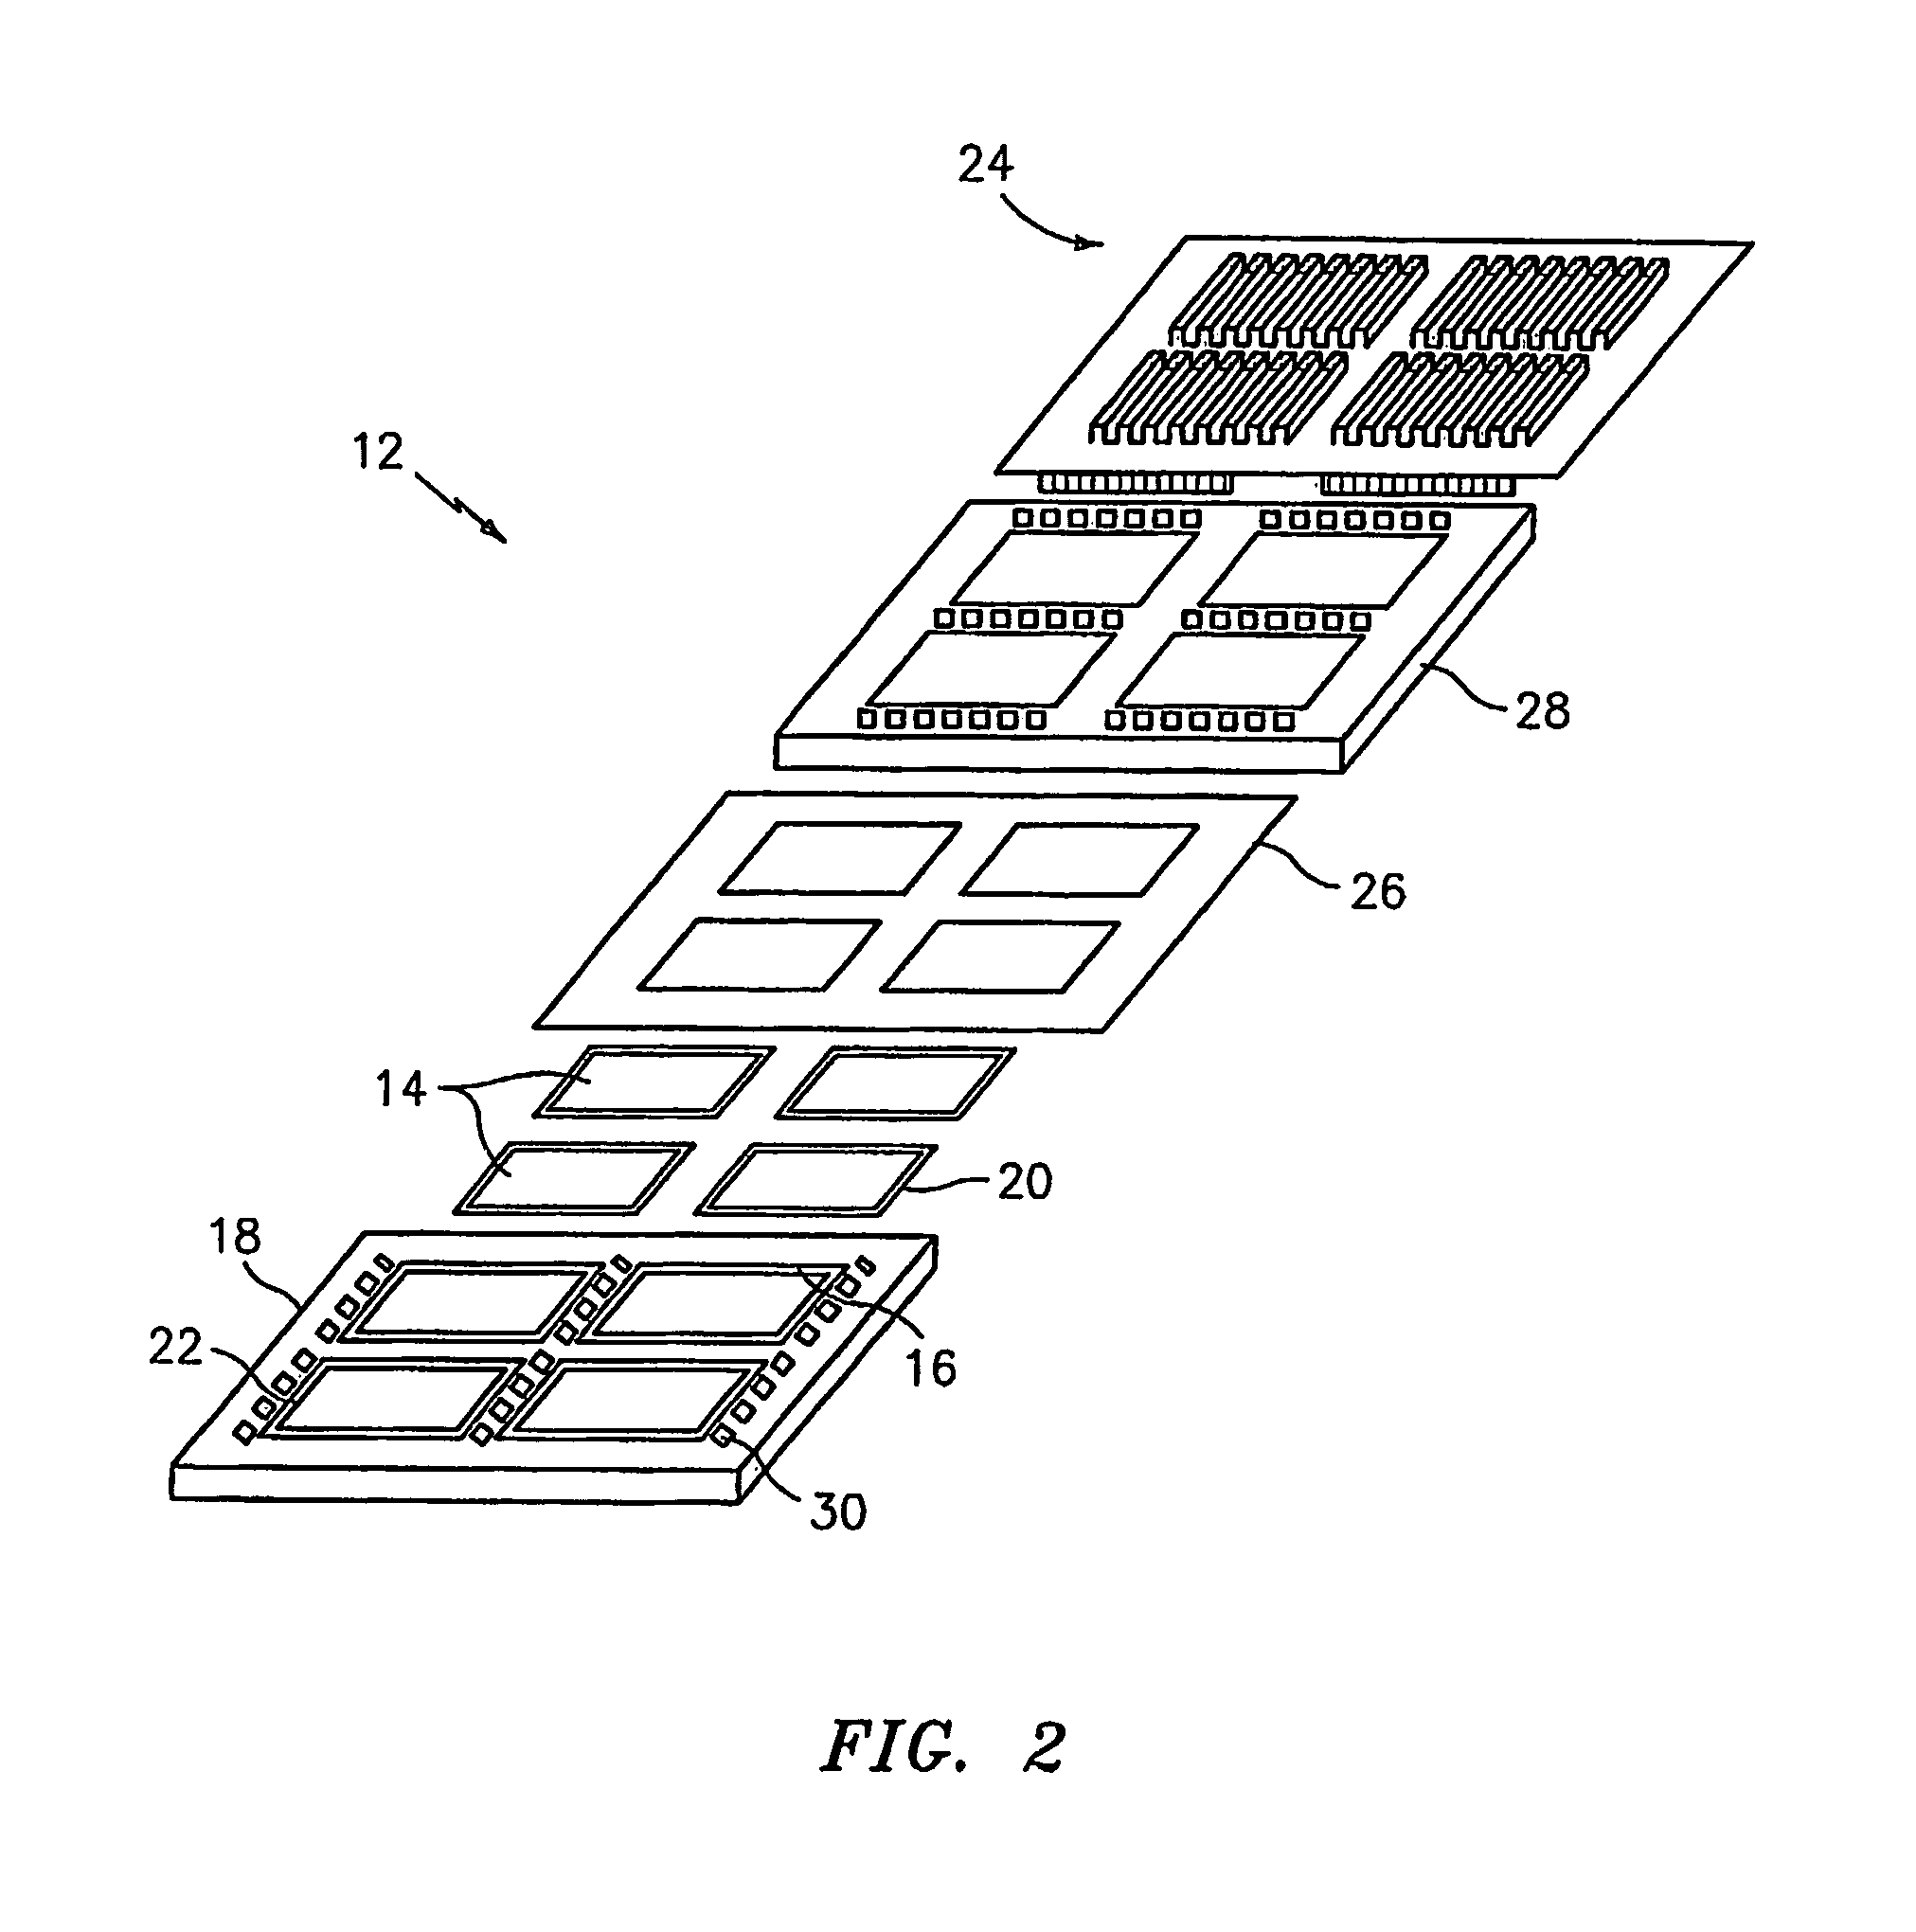 Compliant stack for a planar solid oxide fuel cell